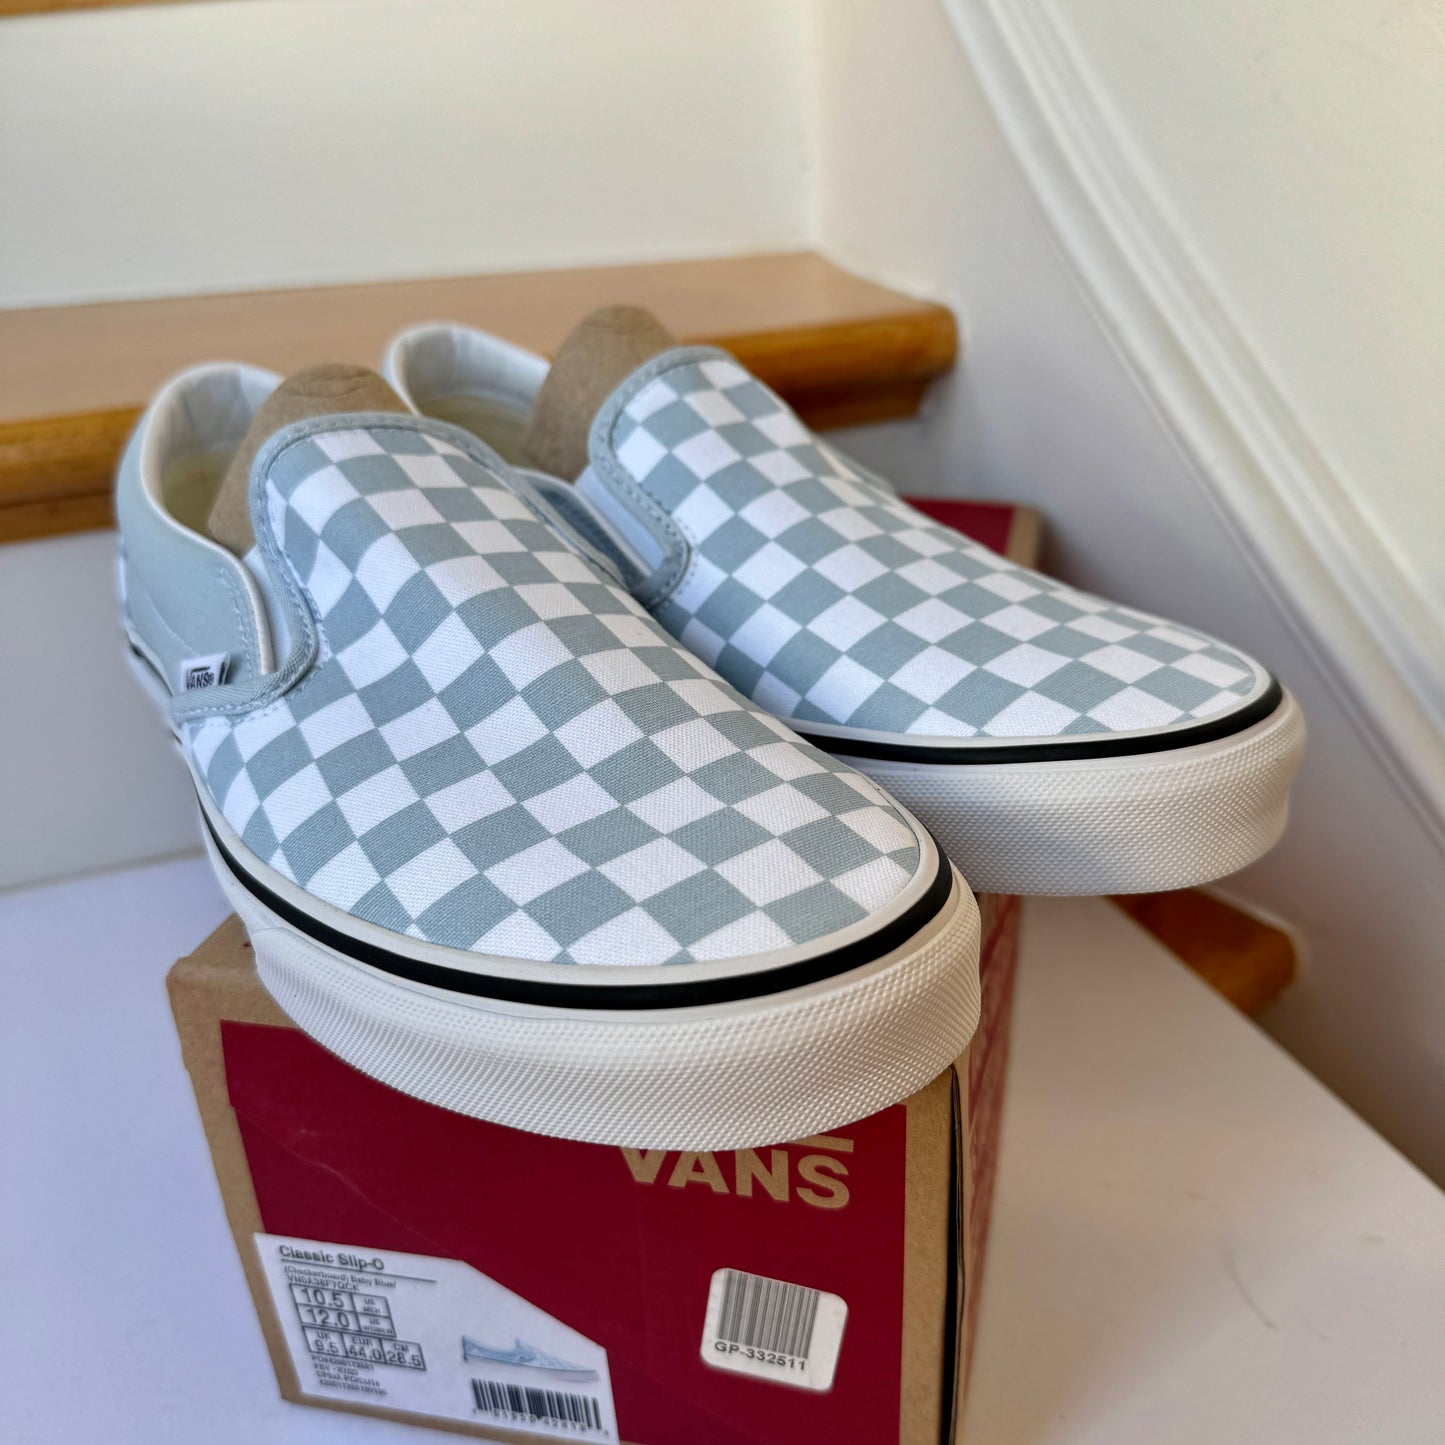 Vans Slip-On Classic Skate Shoes Checkerboard Baby Blue Shoes Classic Unisex